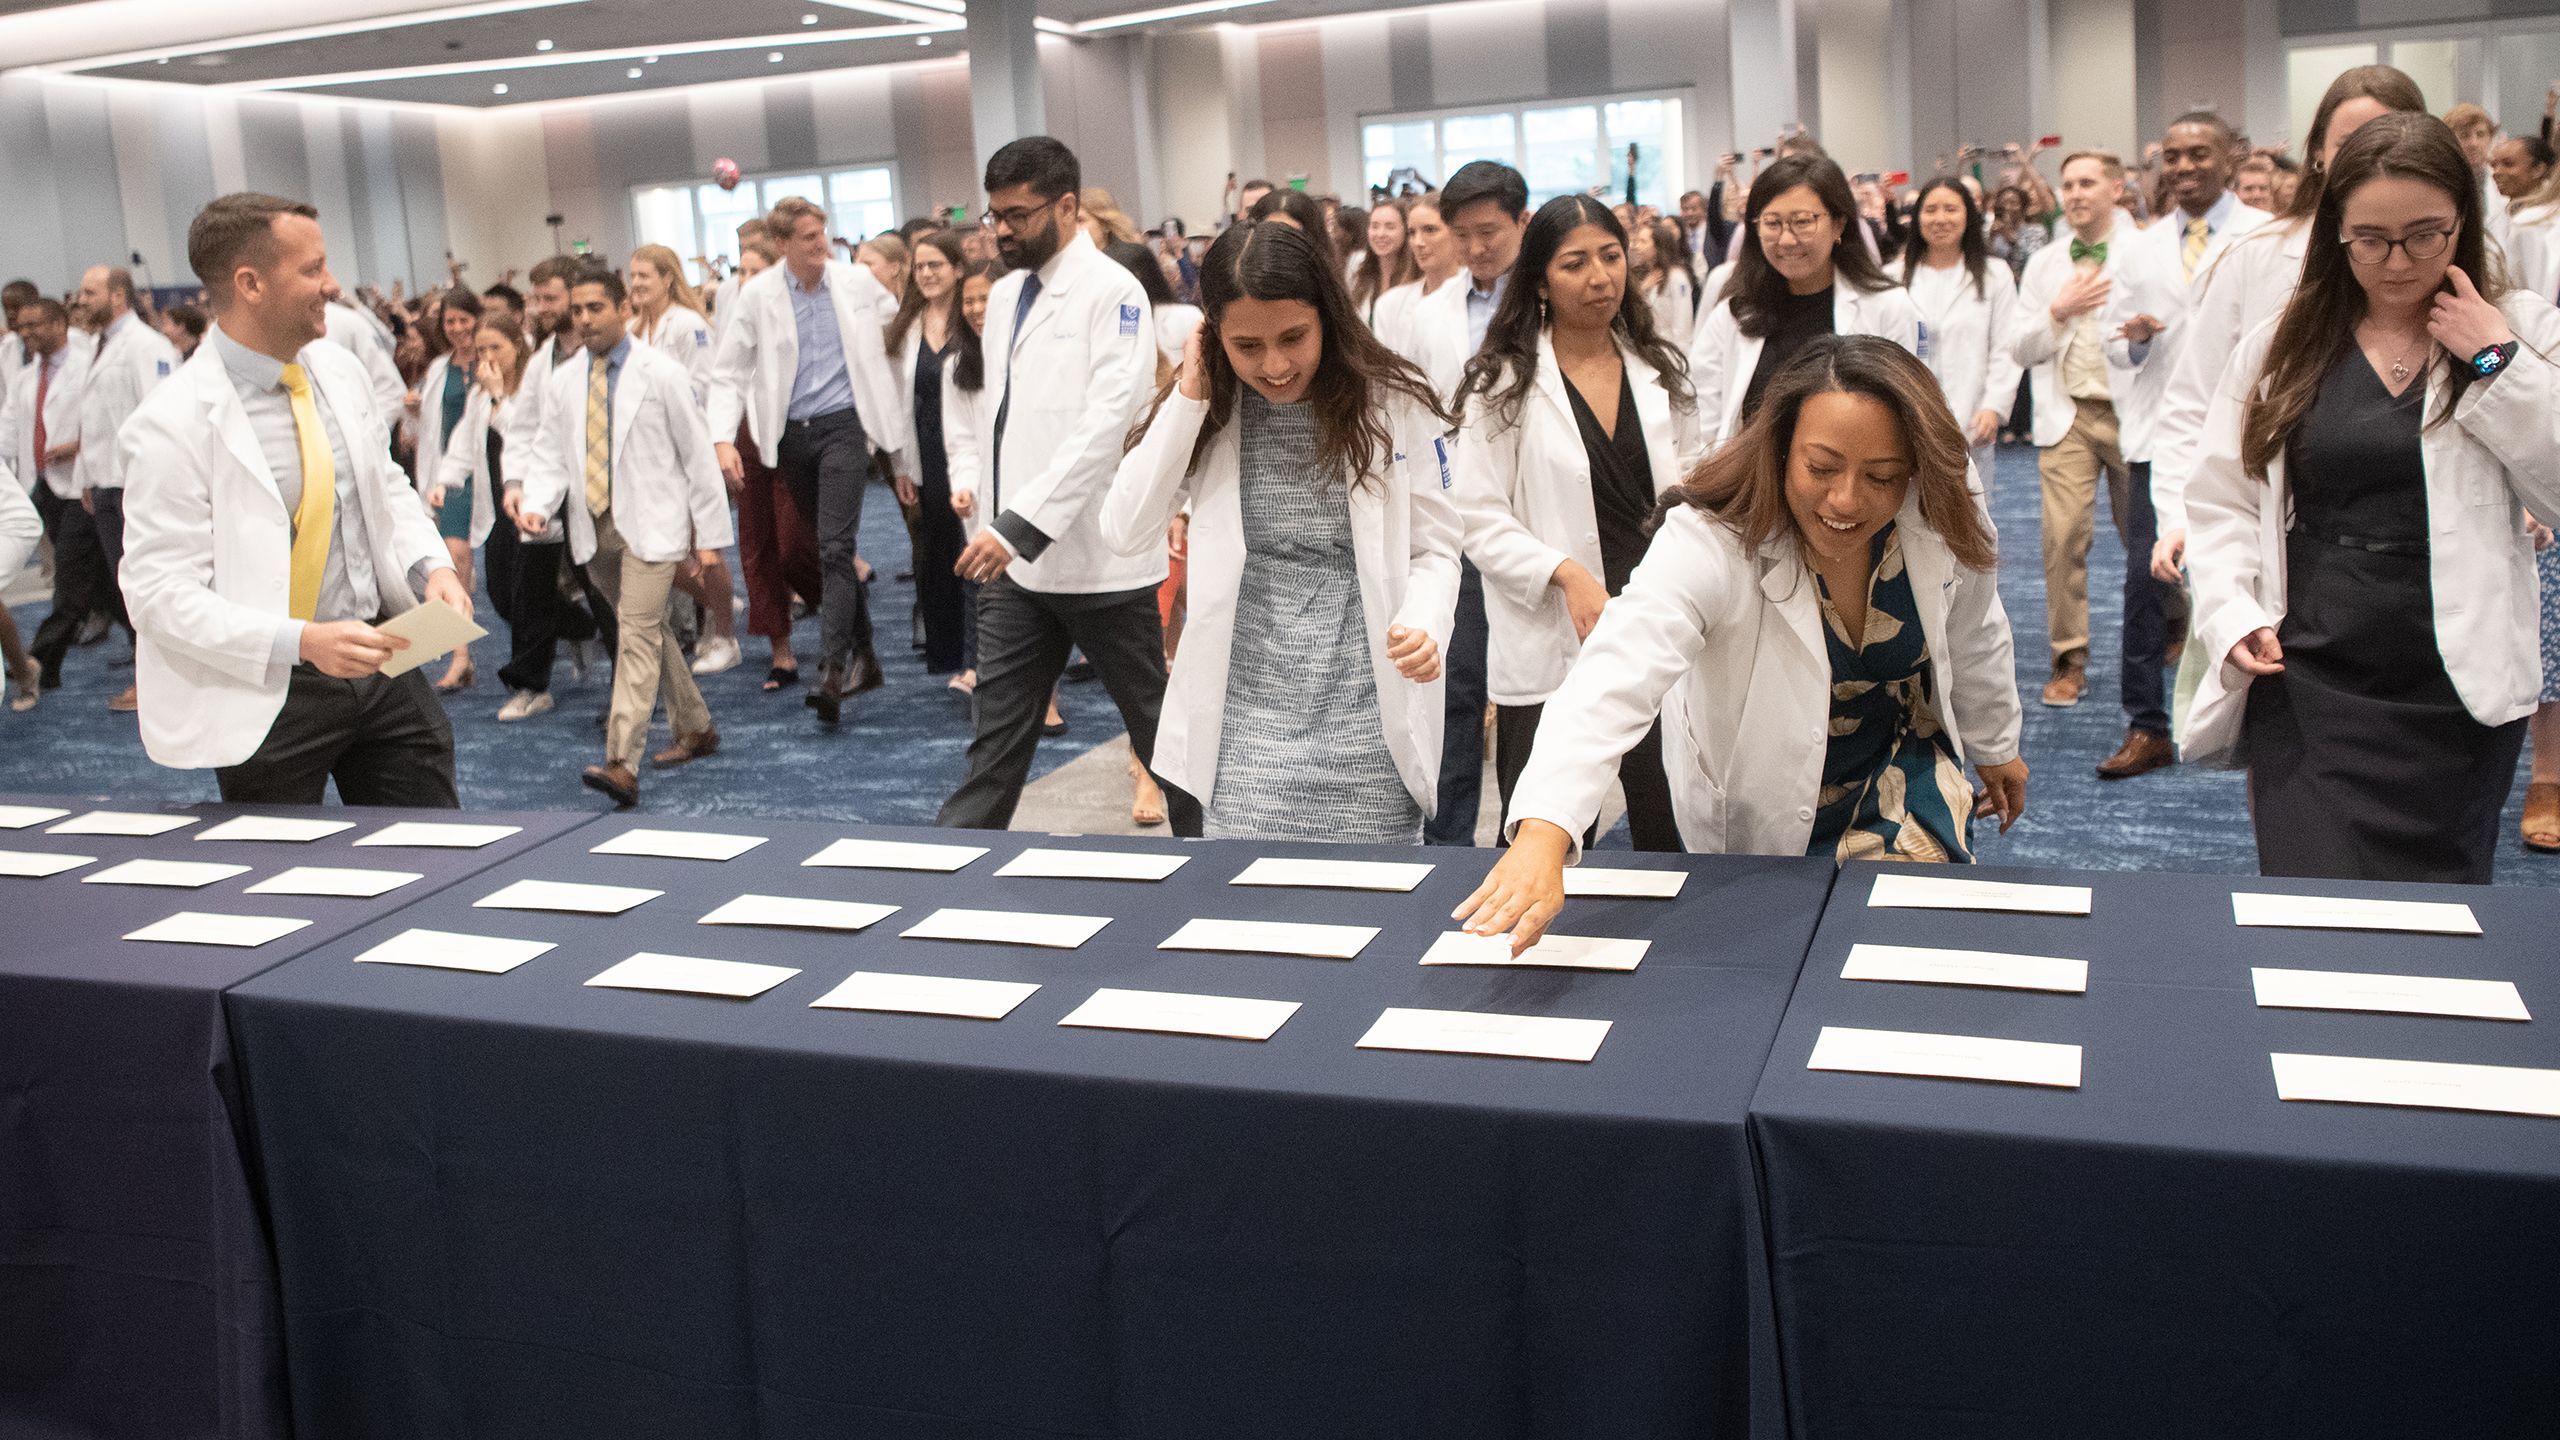 Students in white coats race forward to pick up white envelopes off a table